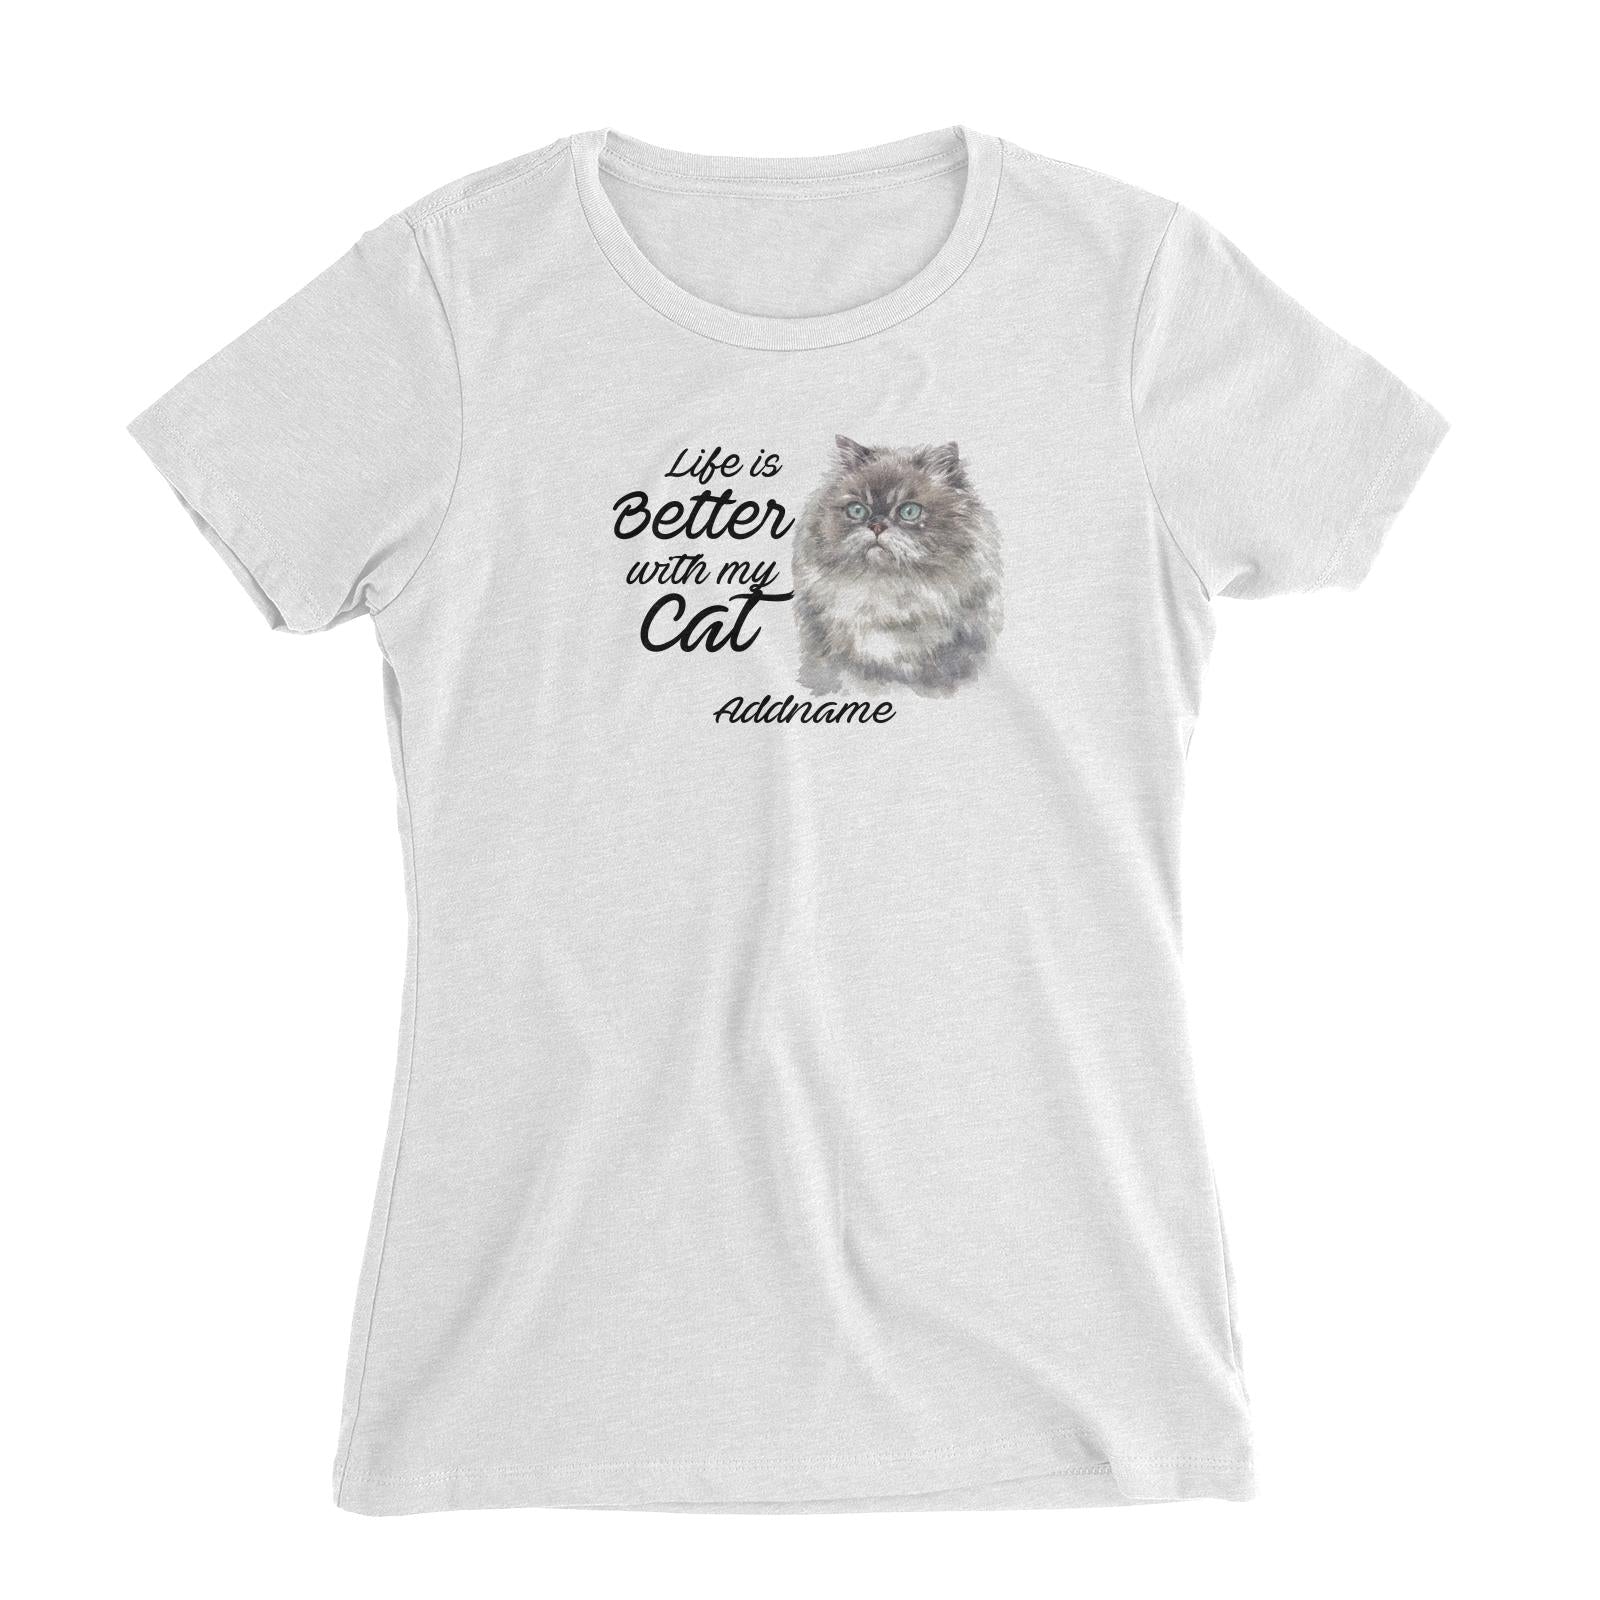 Watercolor Life is Better With My Cat Himalayan Addname Women's Slim Fit T-Shirt